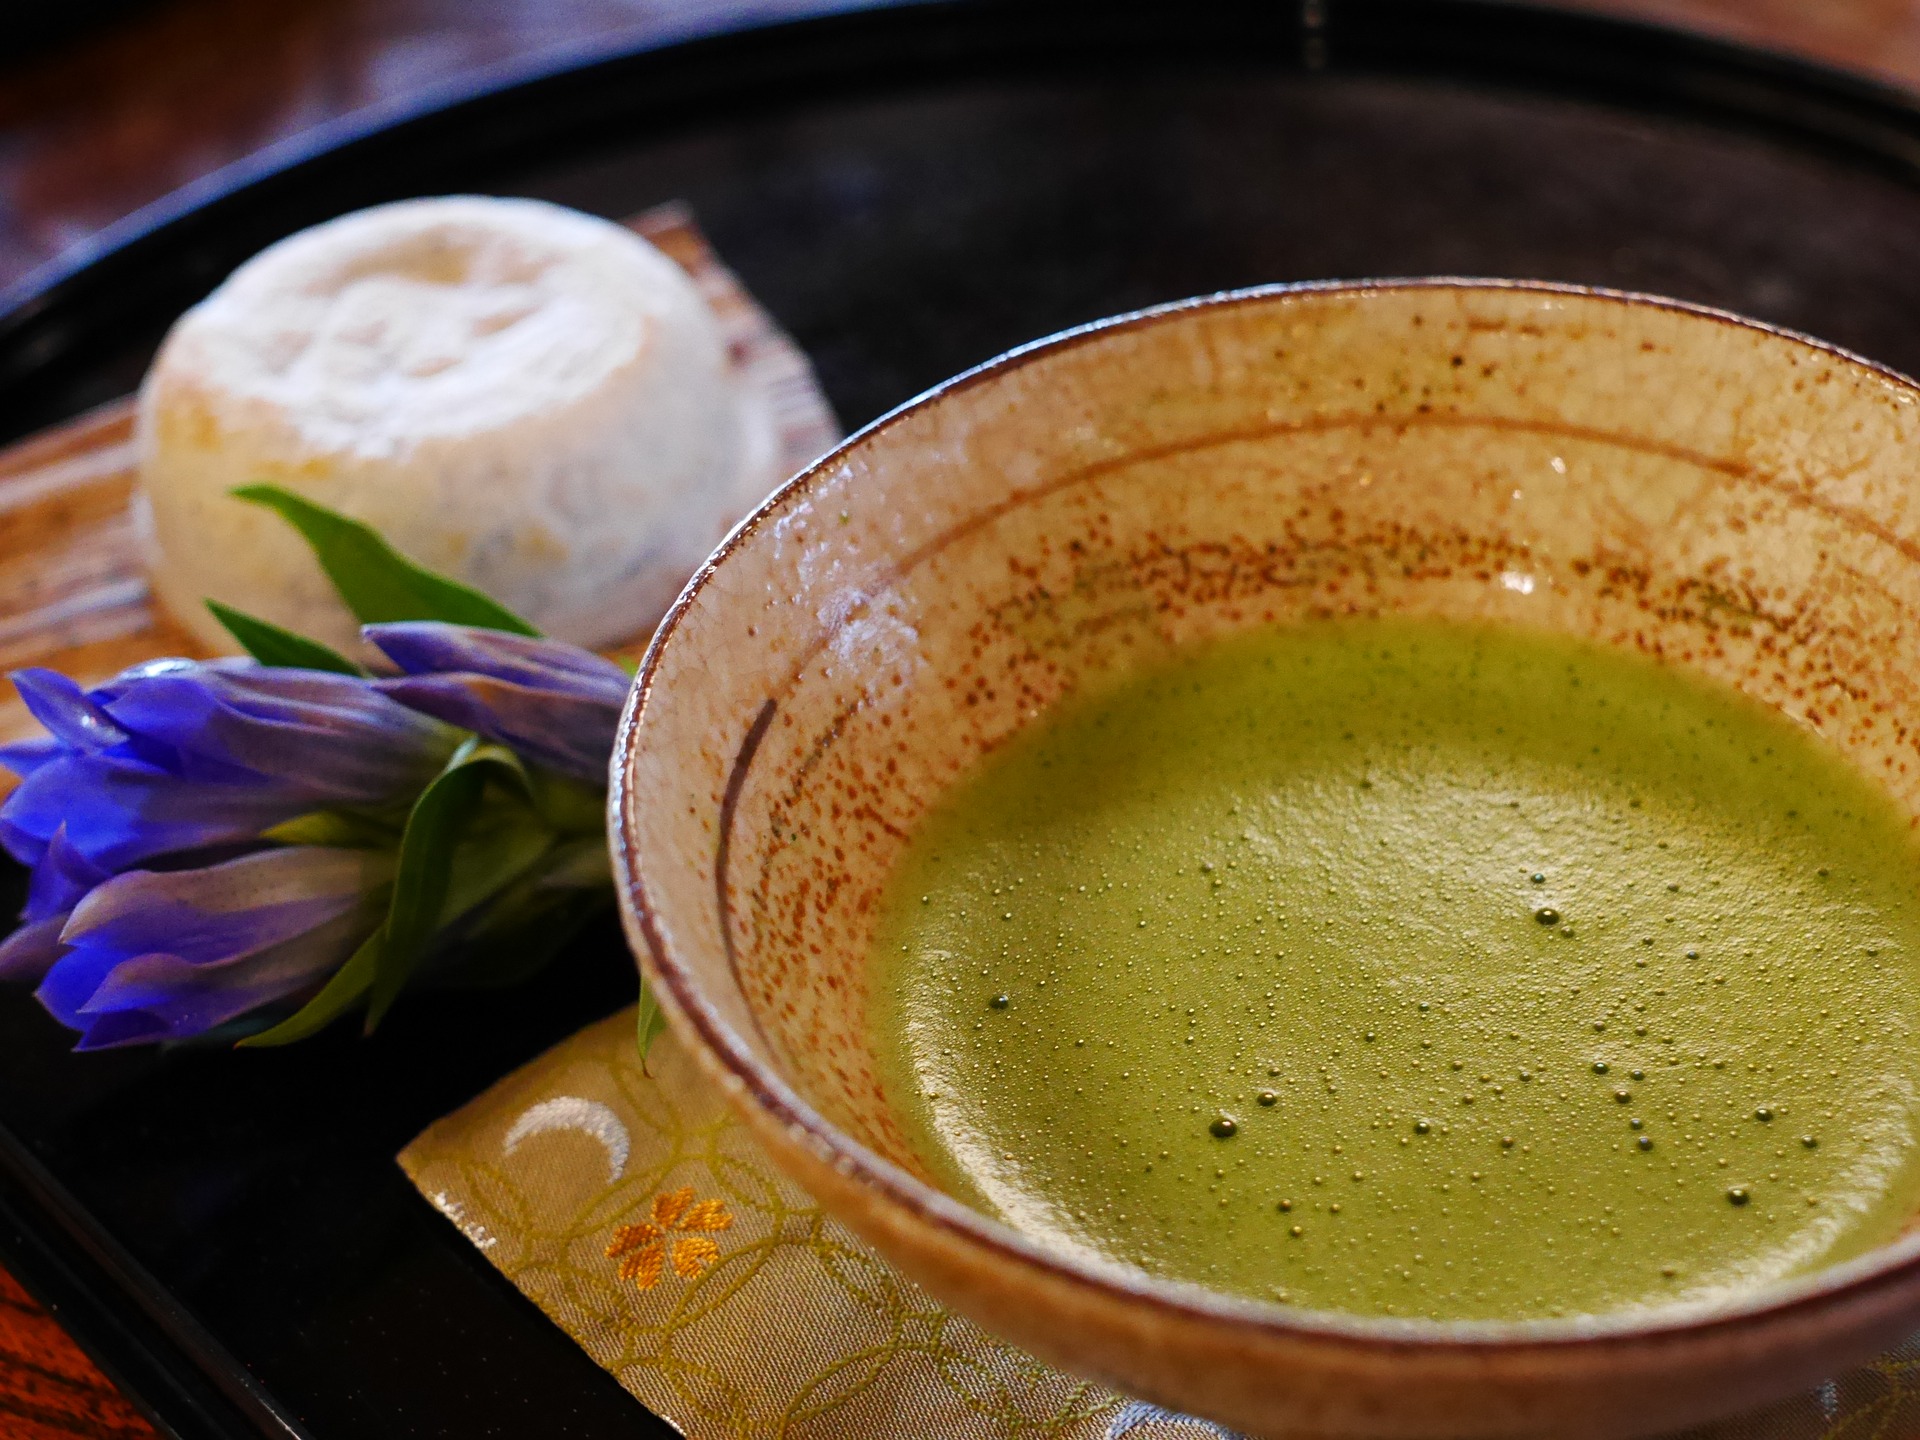 Can Beauty and Wellness Be Found In A Cup of Matcha Tea?